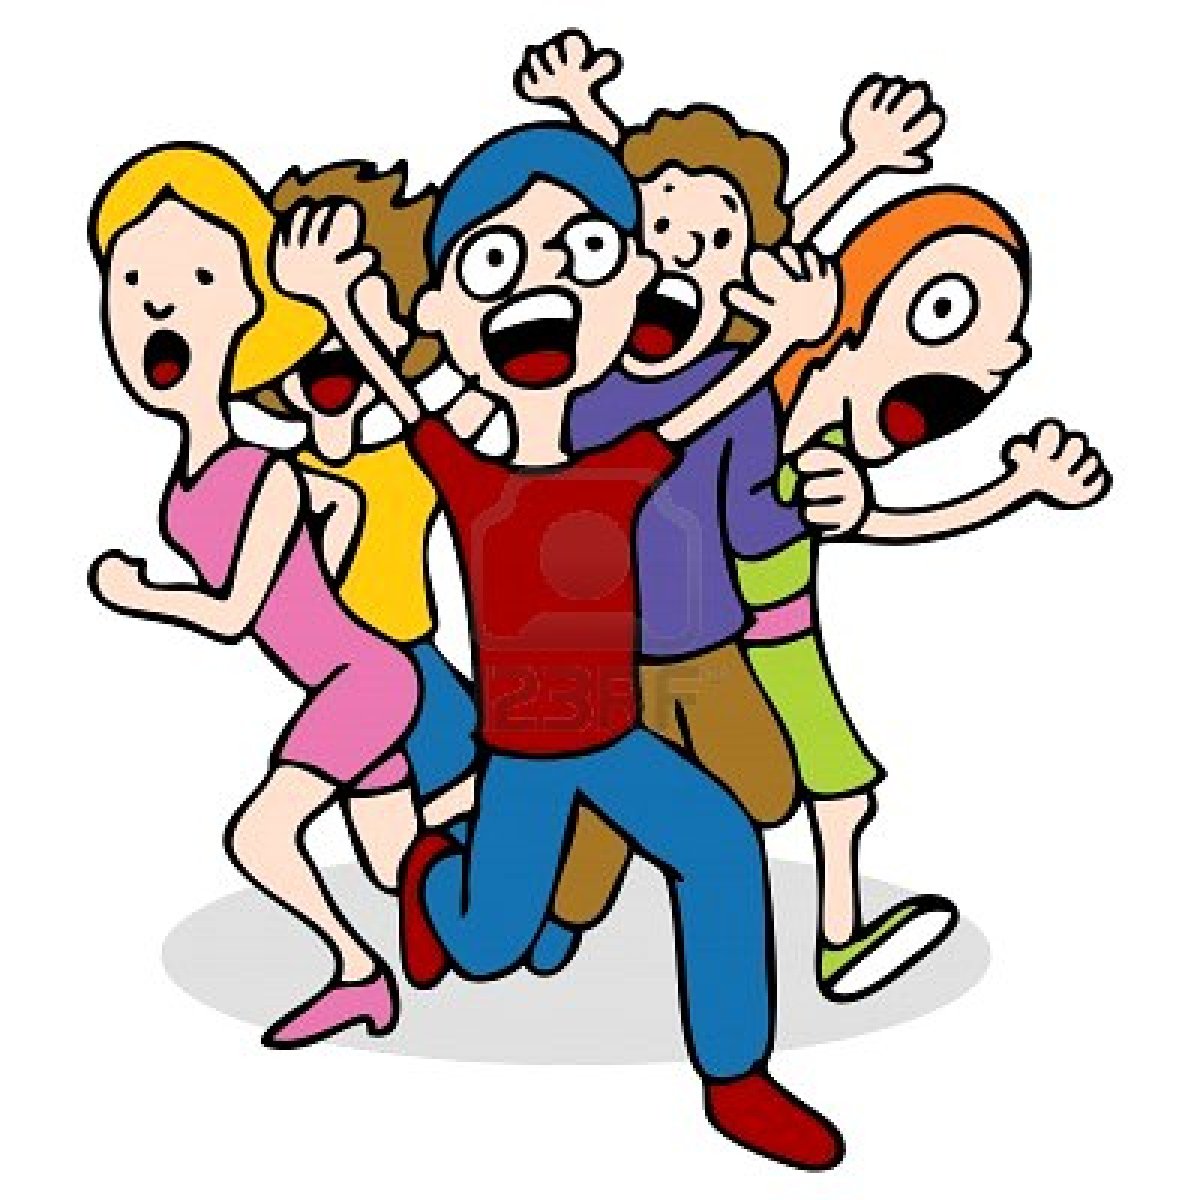 Free Animated People, Download Free Animated People png images, Free  ClipArts on Clipart Library